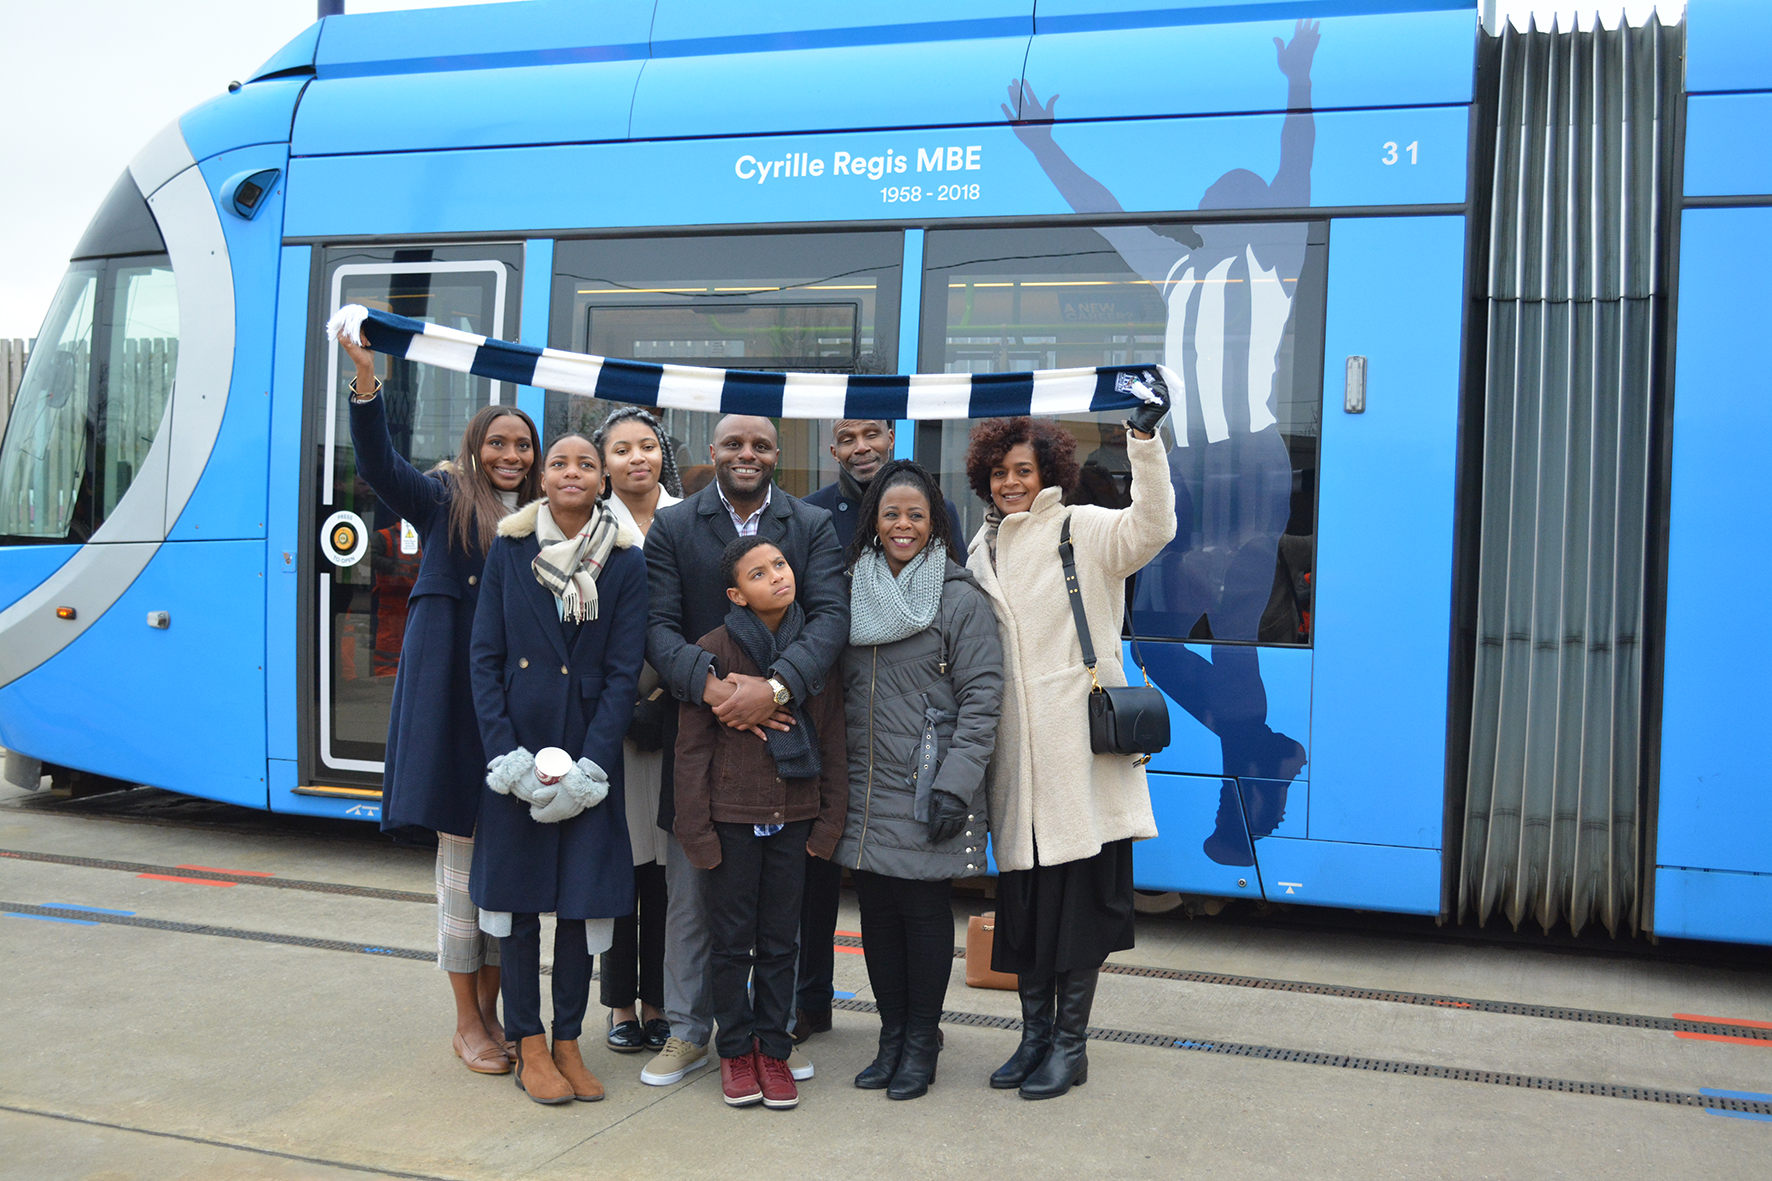 The Regis family with the tram: L-R daughter Michelle, granddaughters Renee and Jayda, son Robert and grandson Riley, brother David, sister Denise and wife Julia